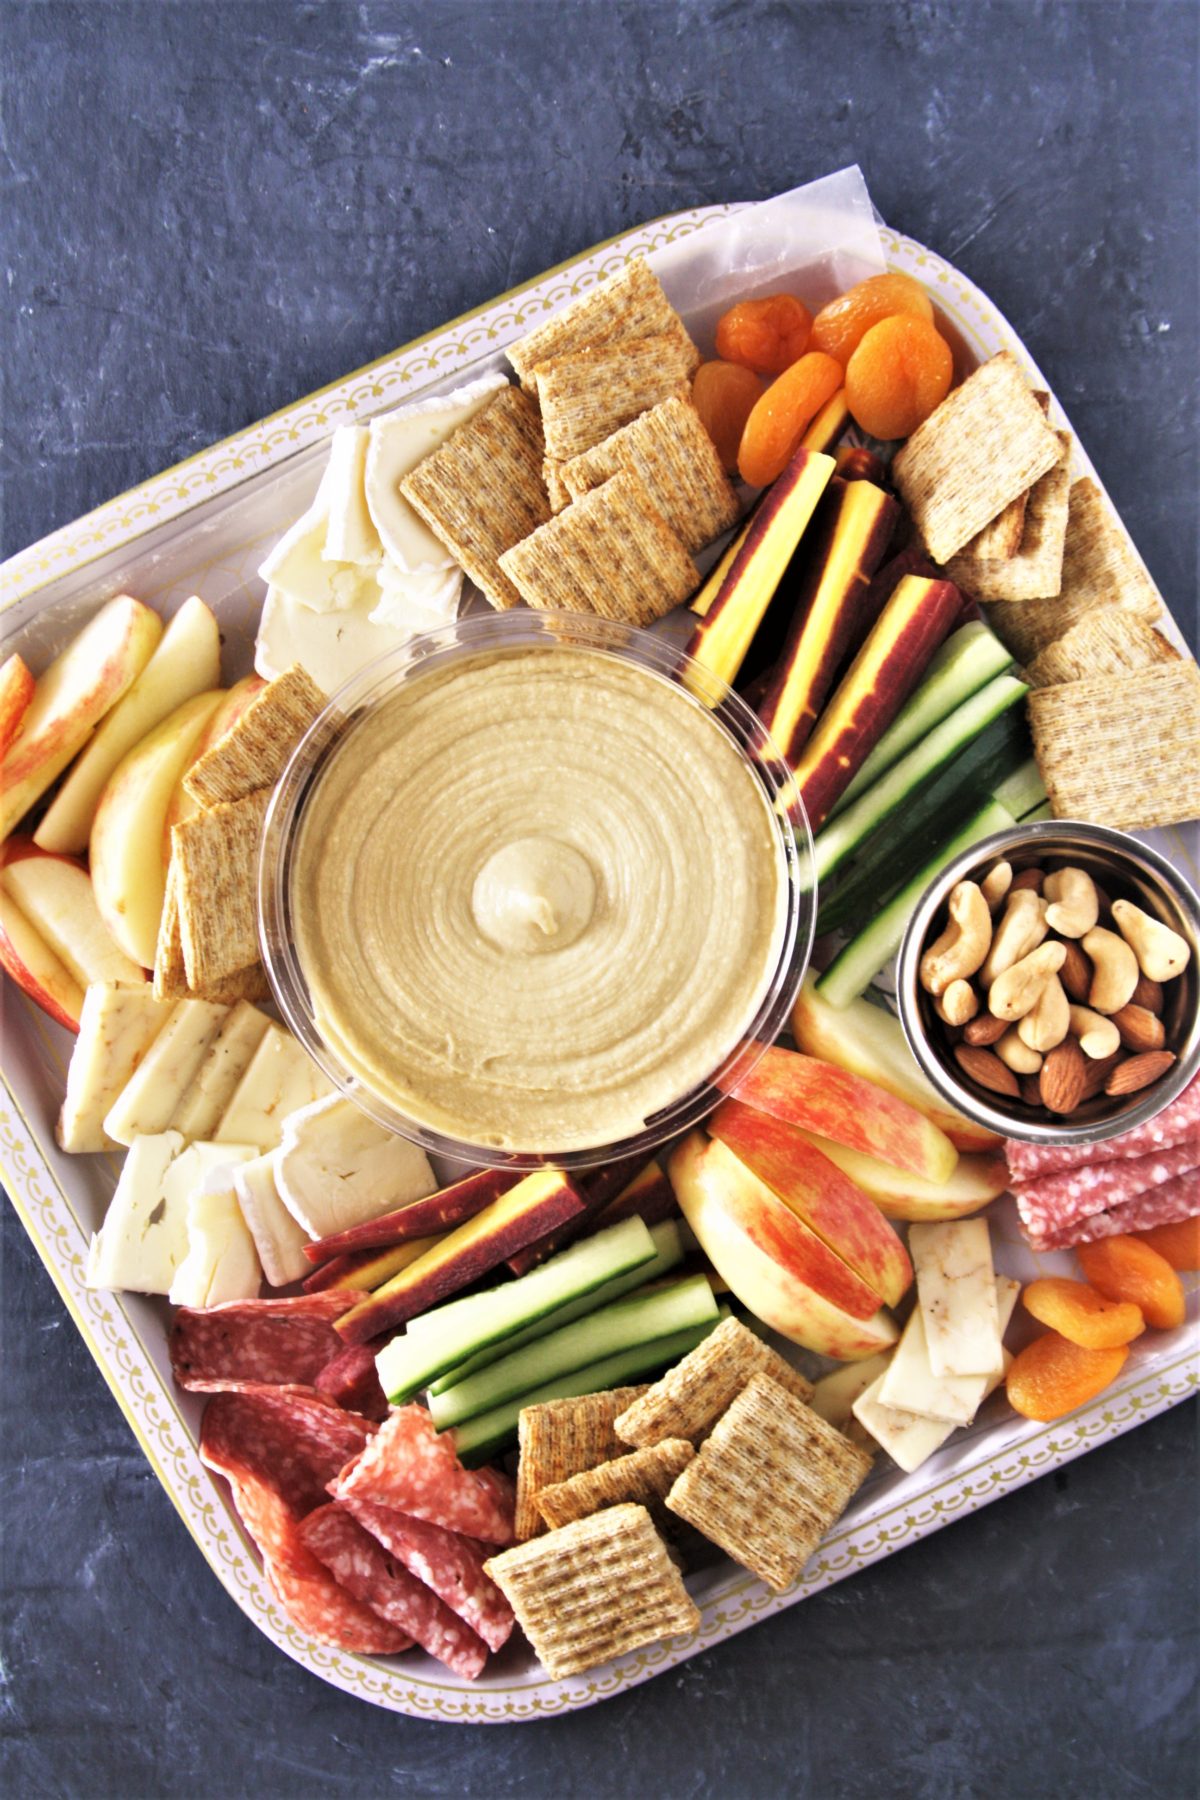 How to Put Together an Ultimate Picnic Snack Board - The Tasty Bite